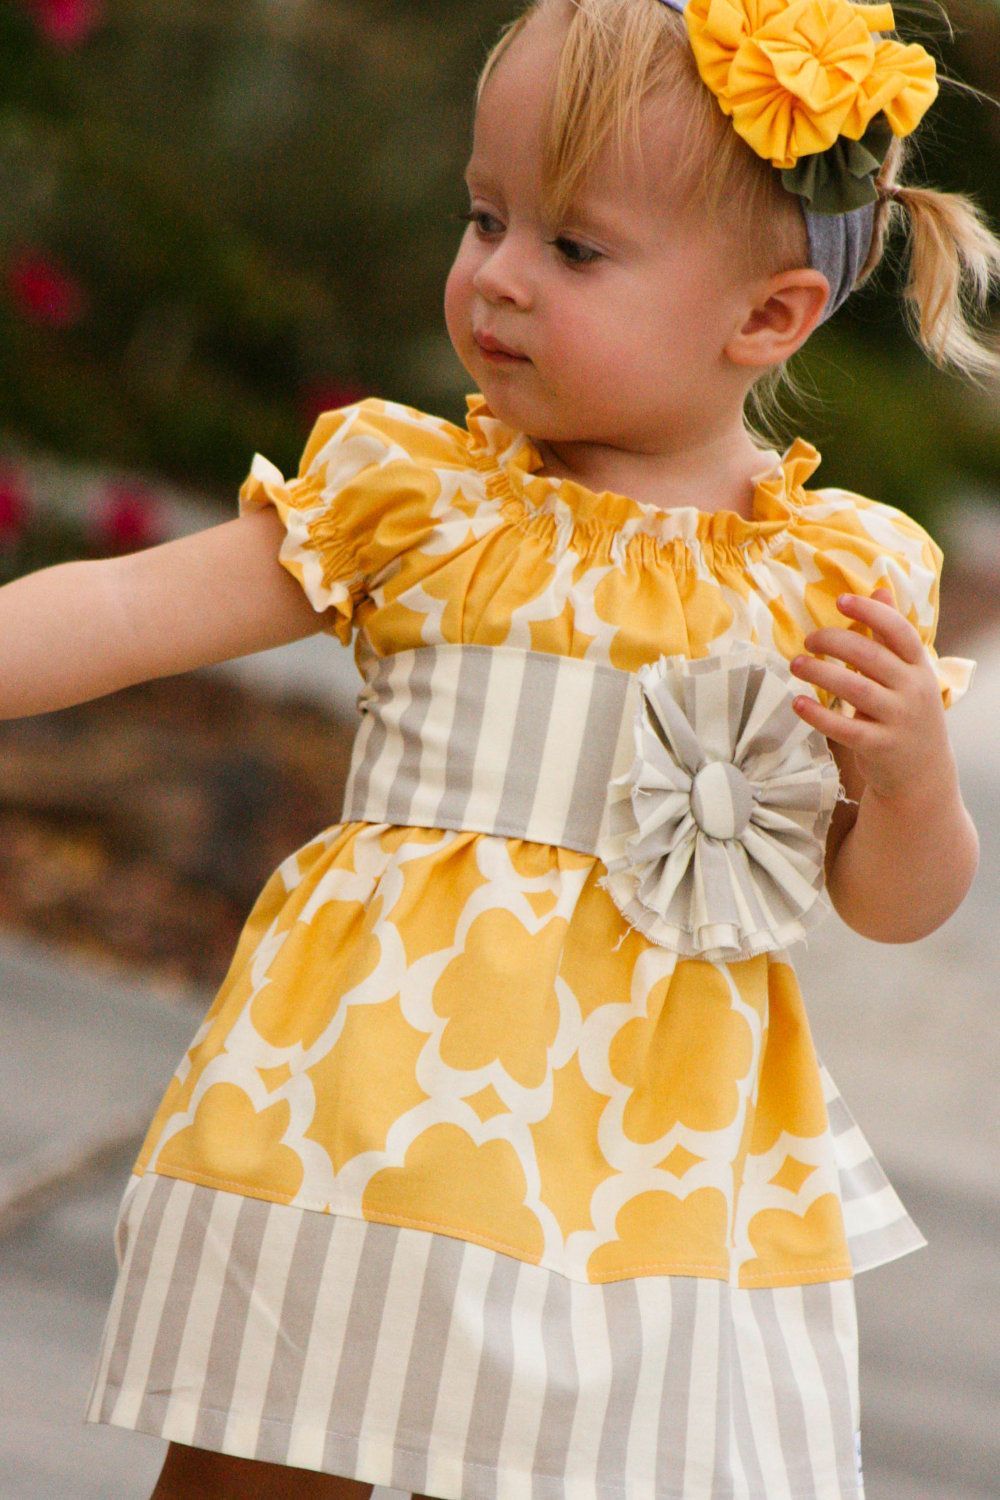 This etsy shop has adorable dresses for little girls